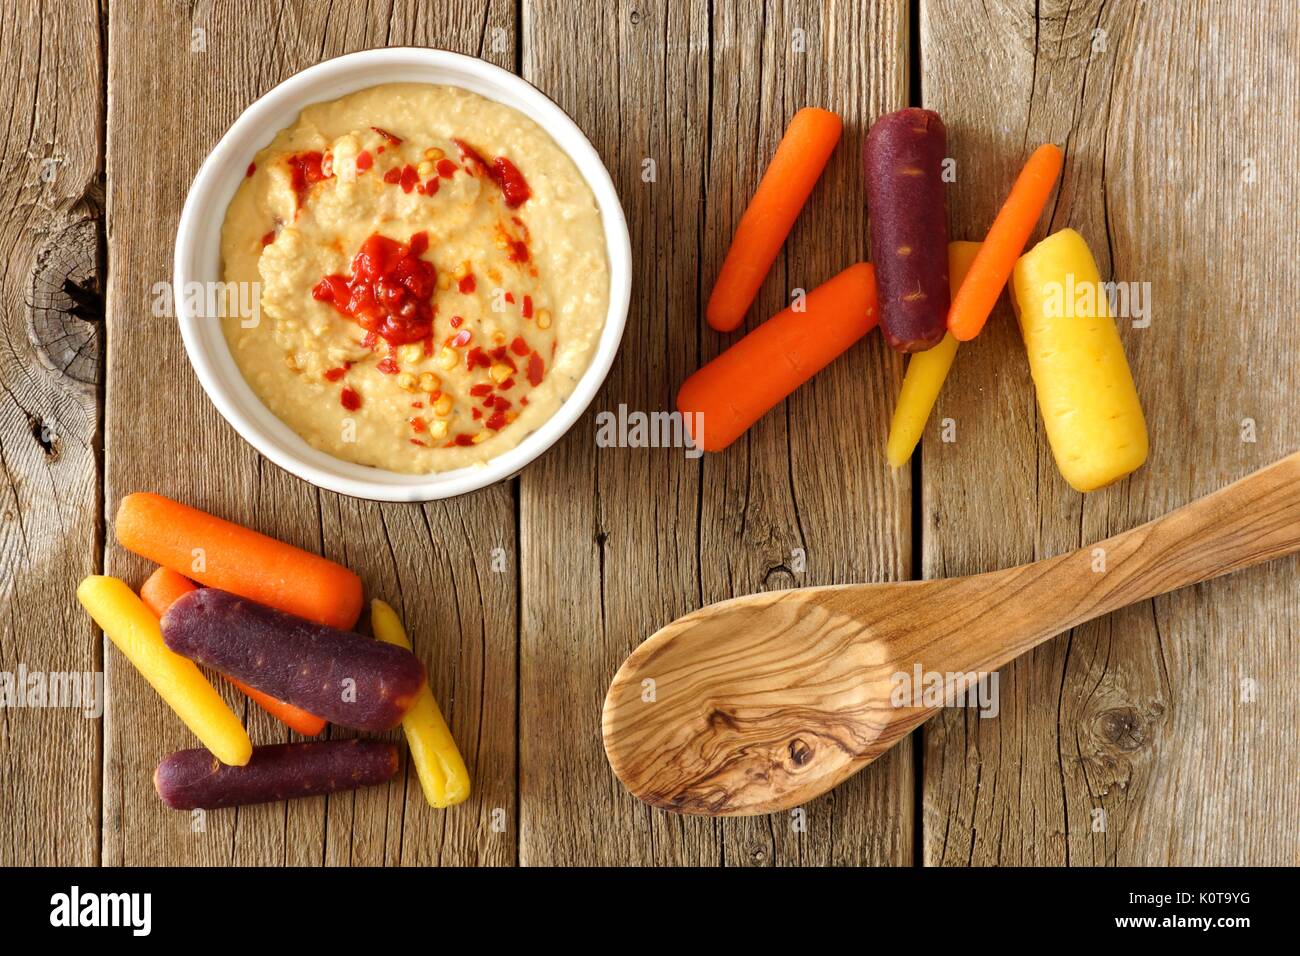 Baby rainbow carrots with hummus dip and spoon, overhead view on a rustic wooden background Stock Photo